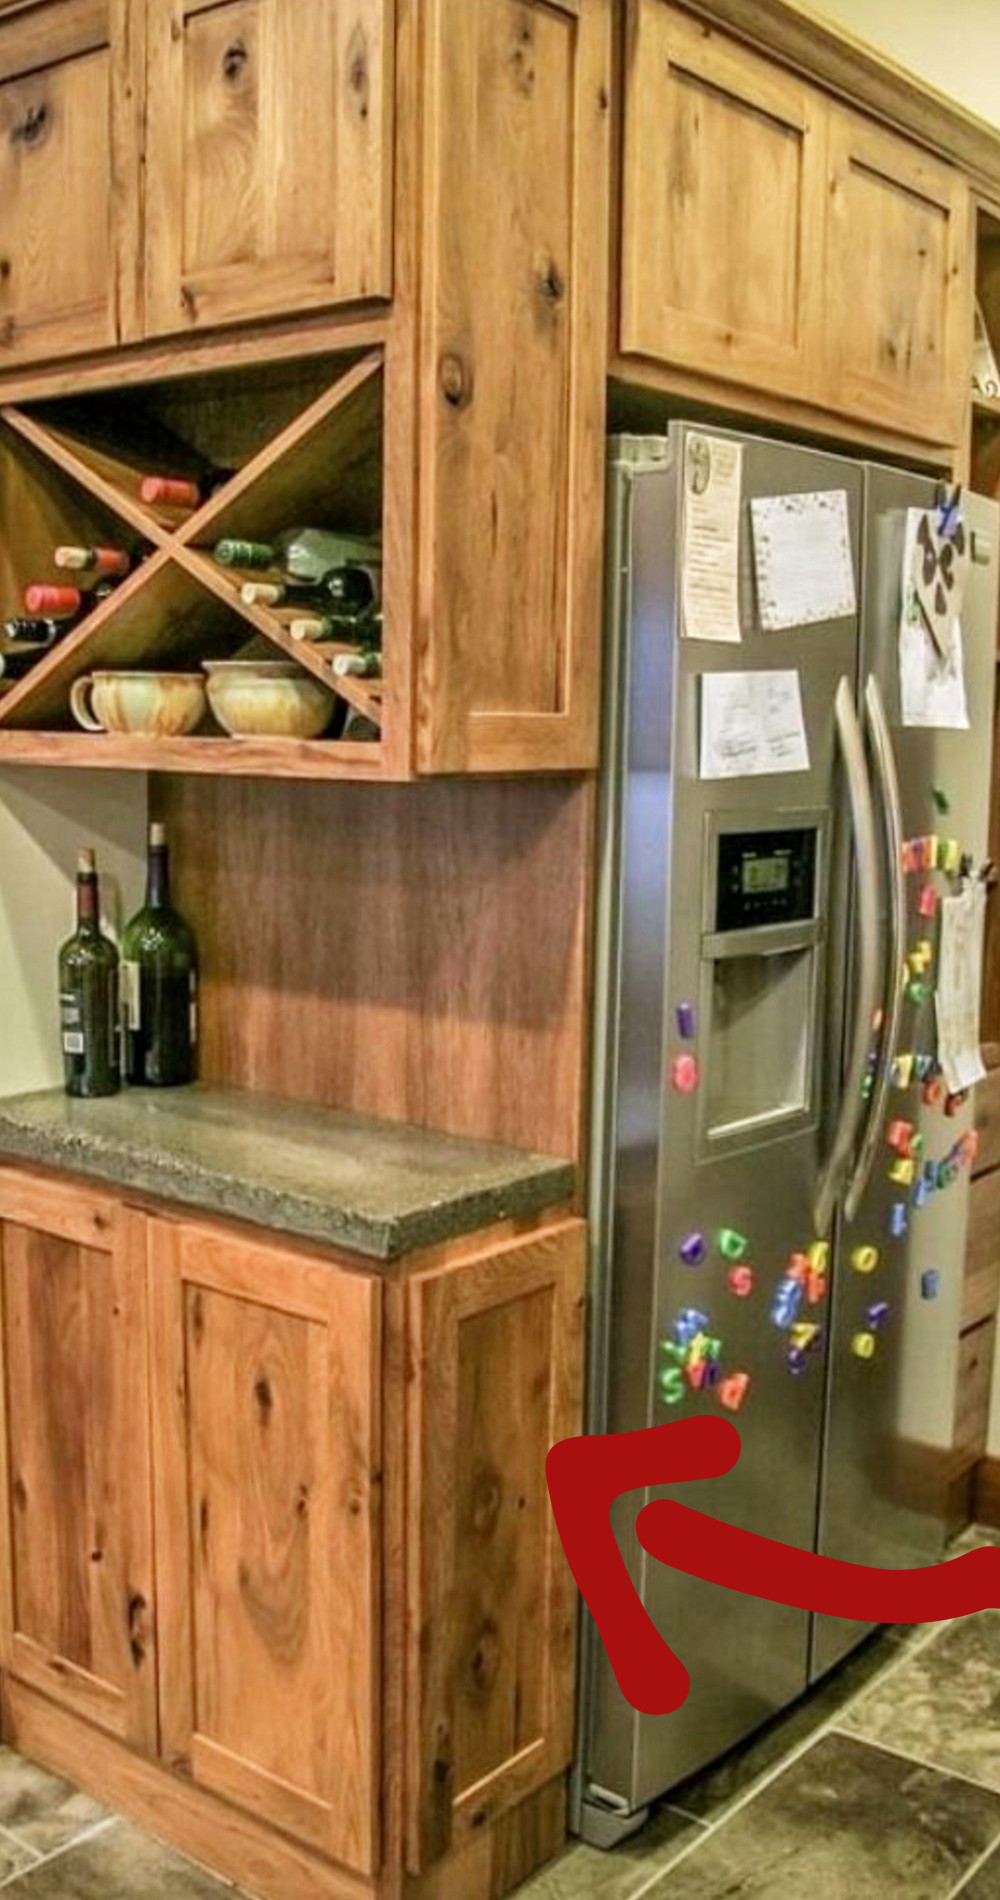 Kitchen DIY project add cabinets around refrigerator to make a dry bar wine rack area